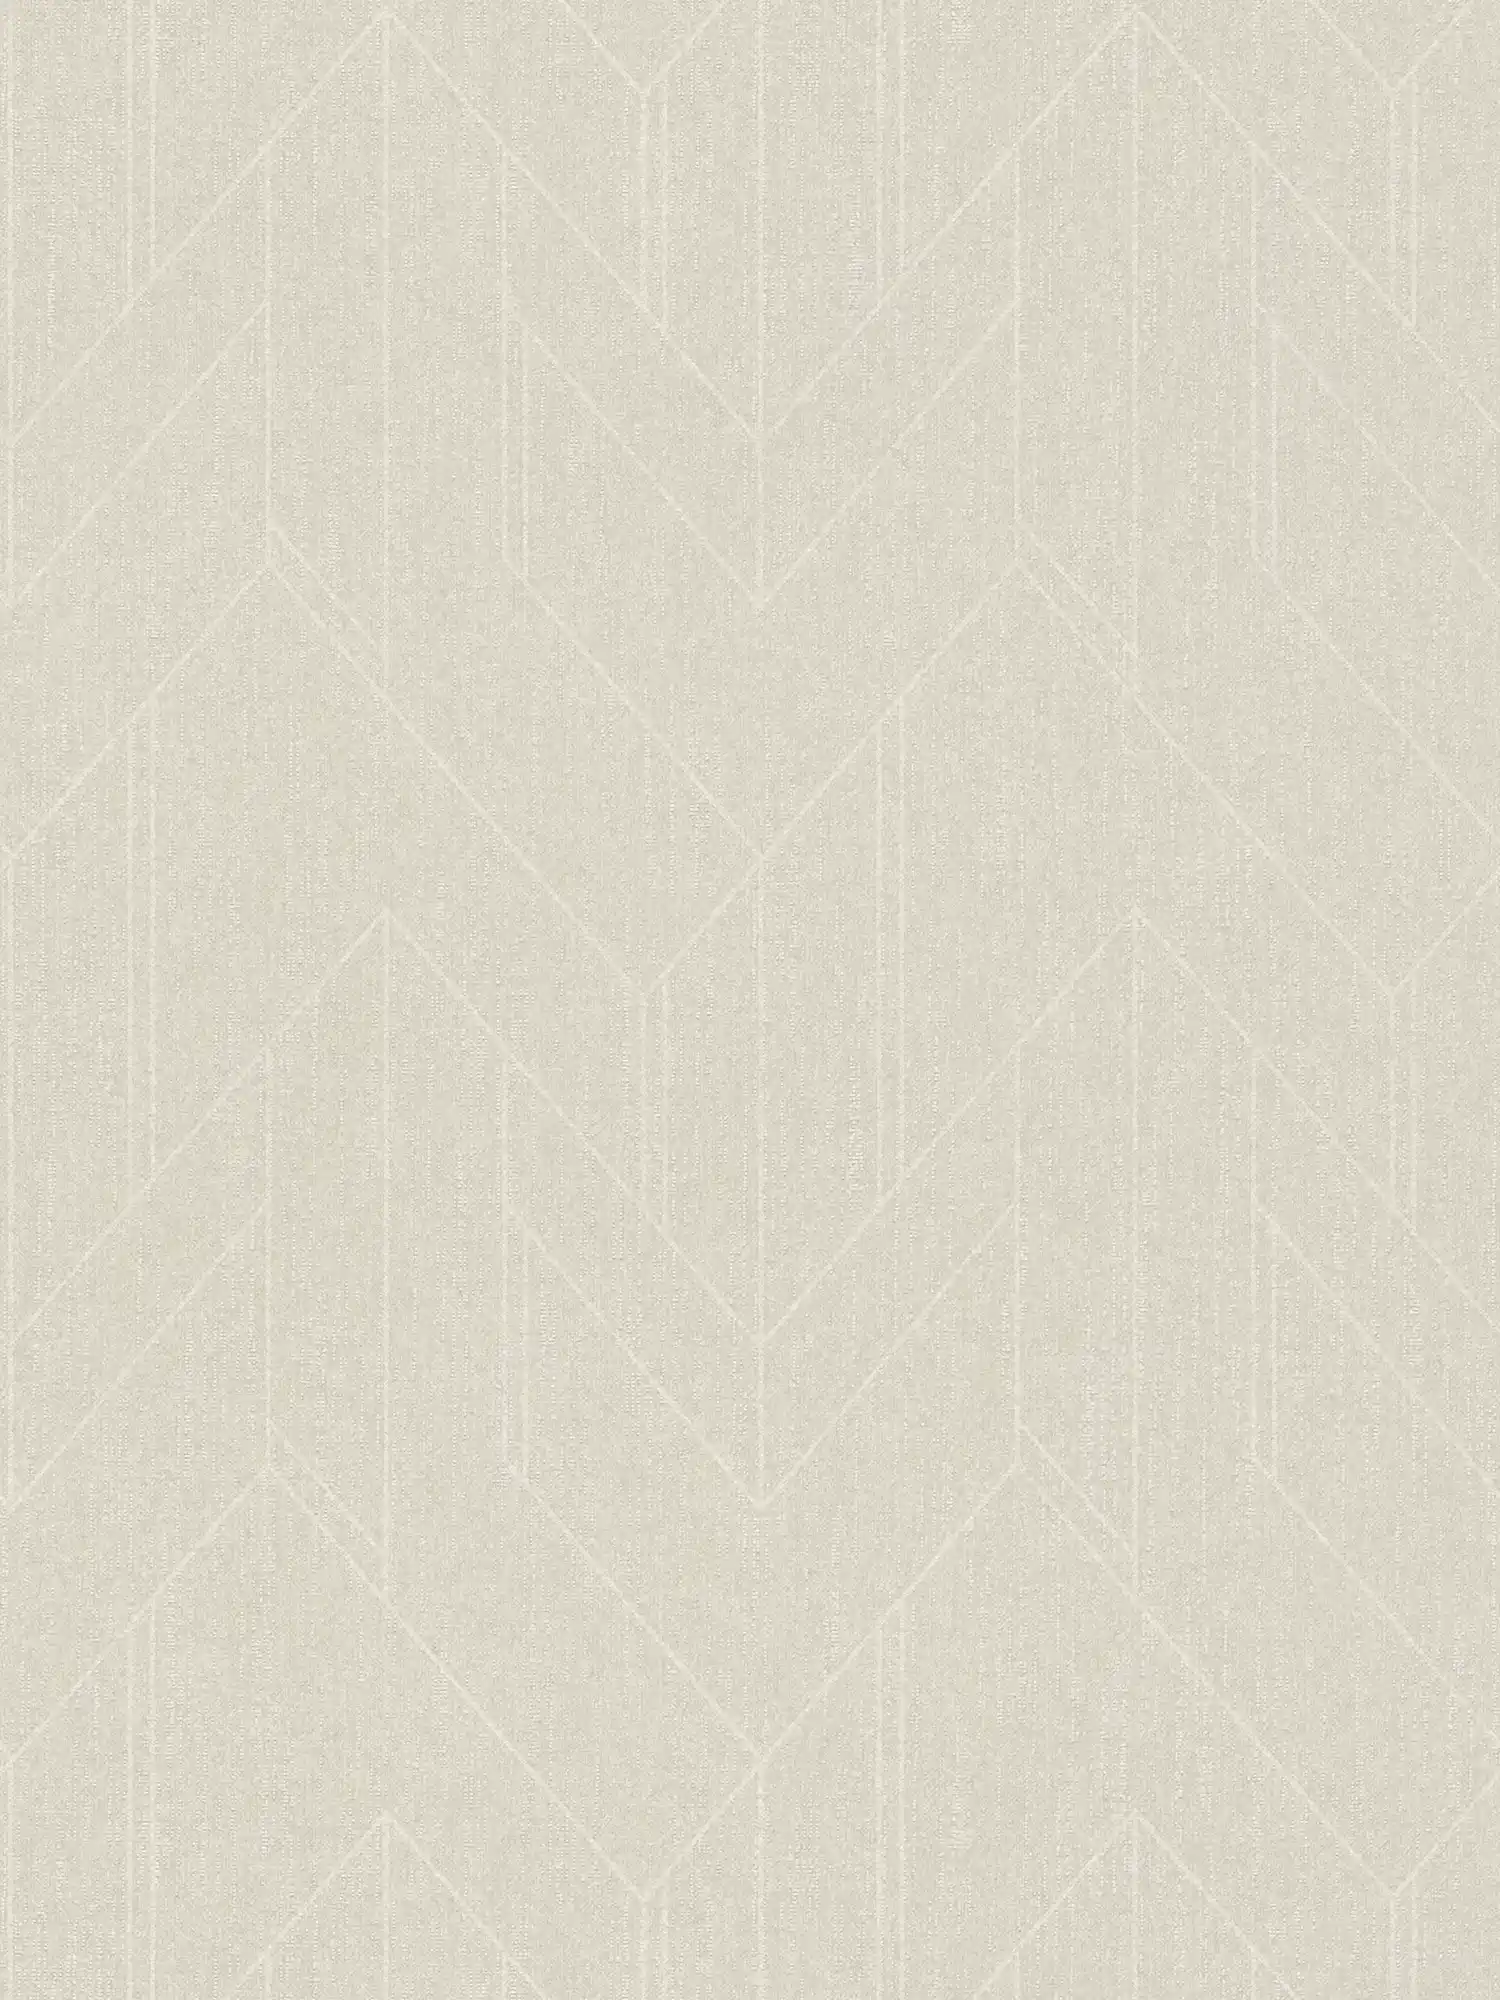 Light grey textile optics wallpaper with glossy pattern in retro style - grey
